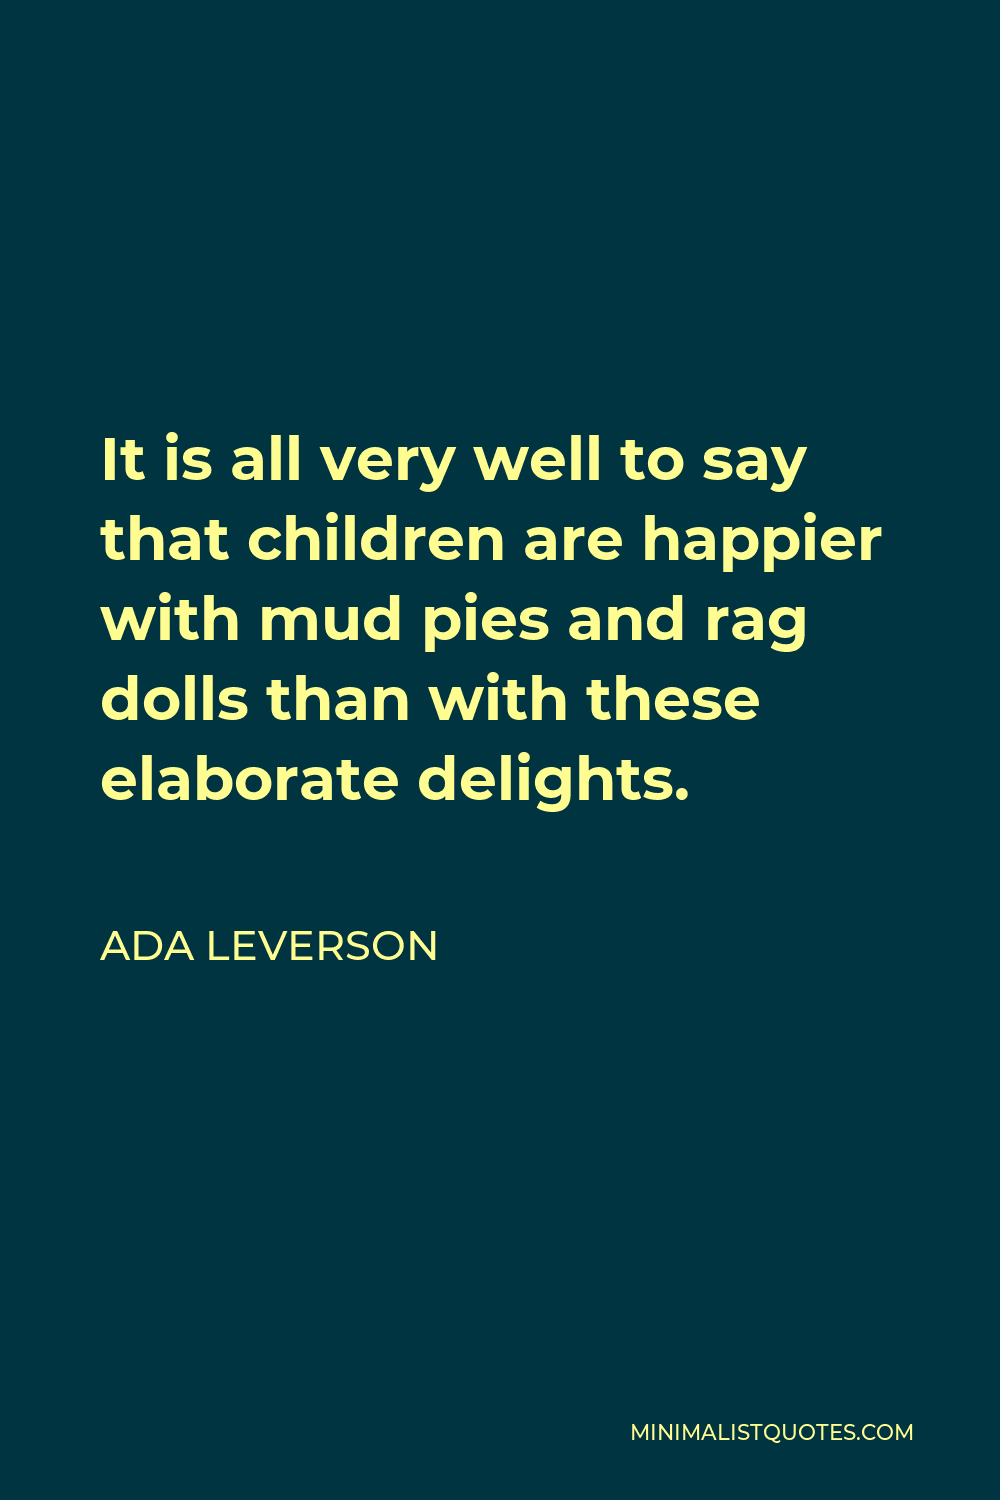 Ada Leverson Quote - It is all very well to say that children are happier with mud pies and rag dolls than with these elaborate delights.